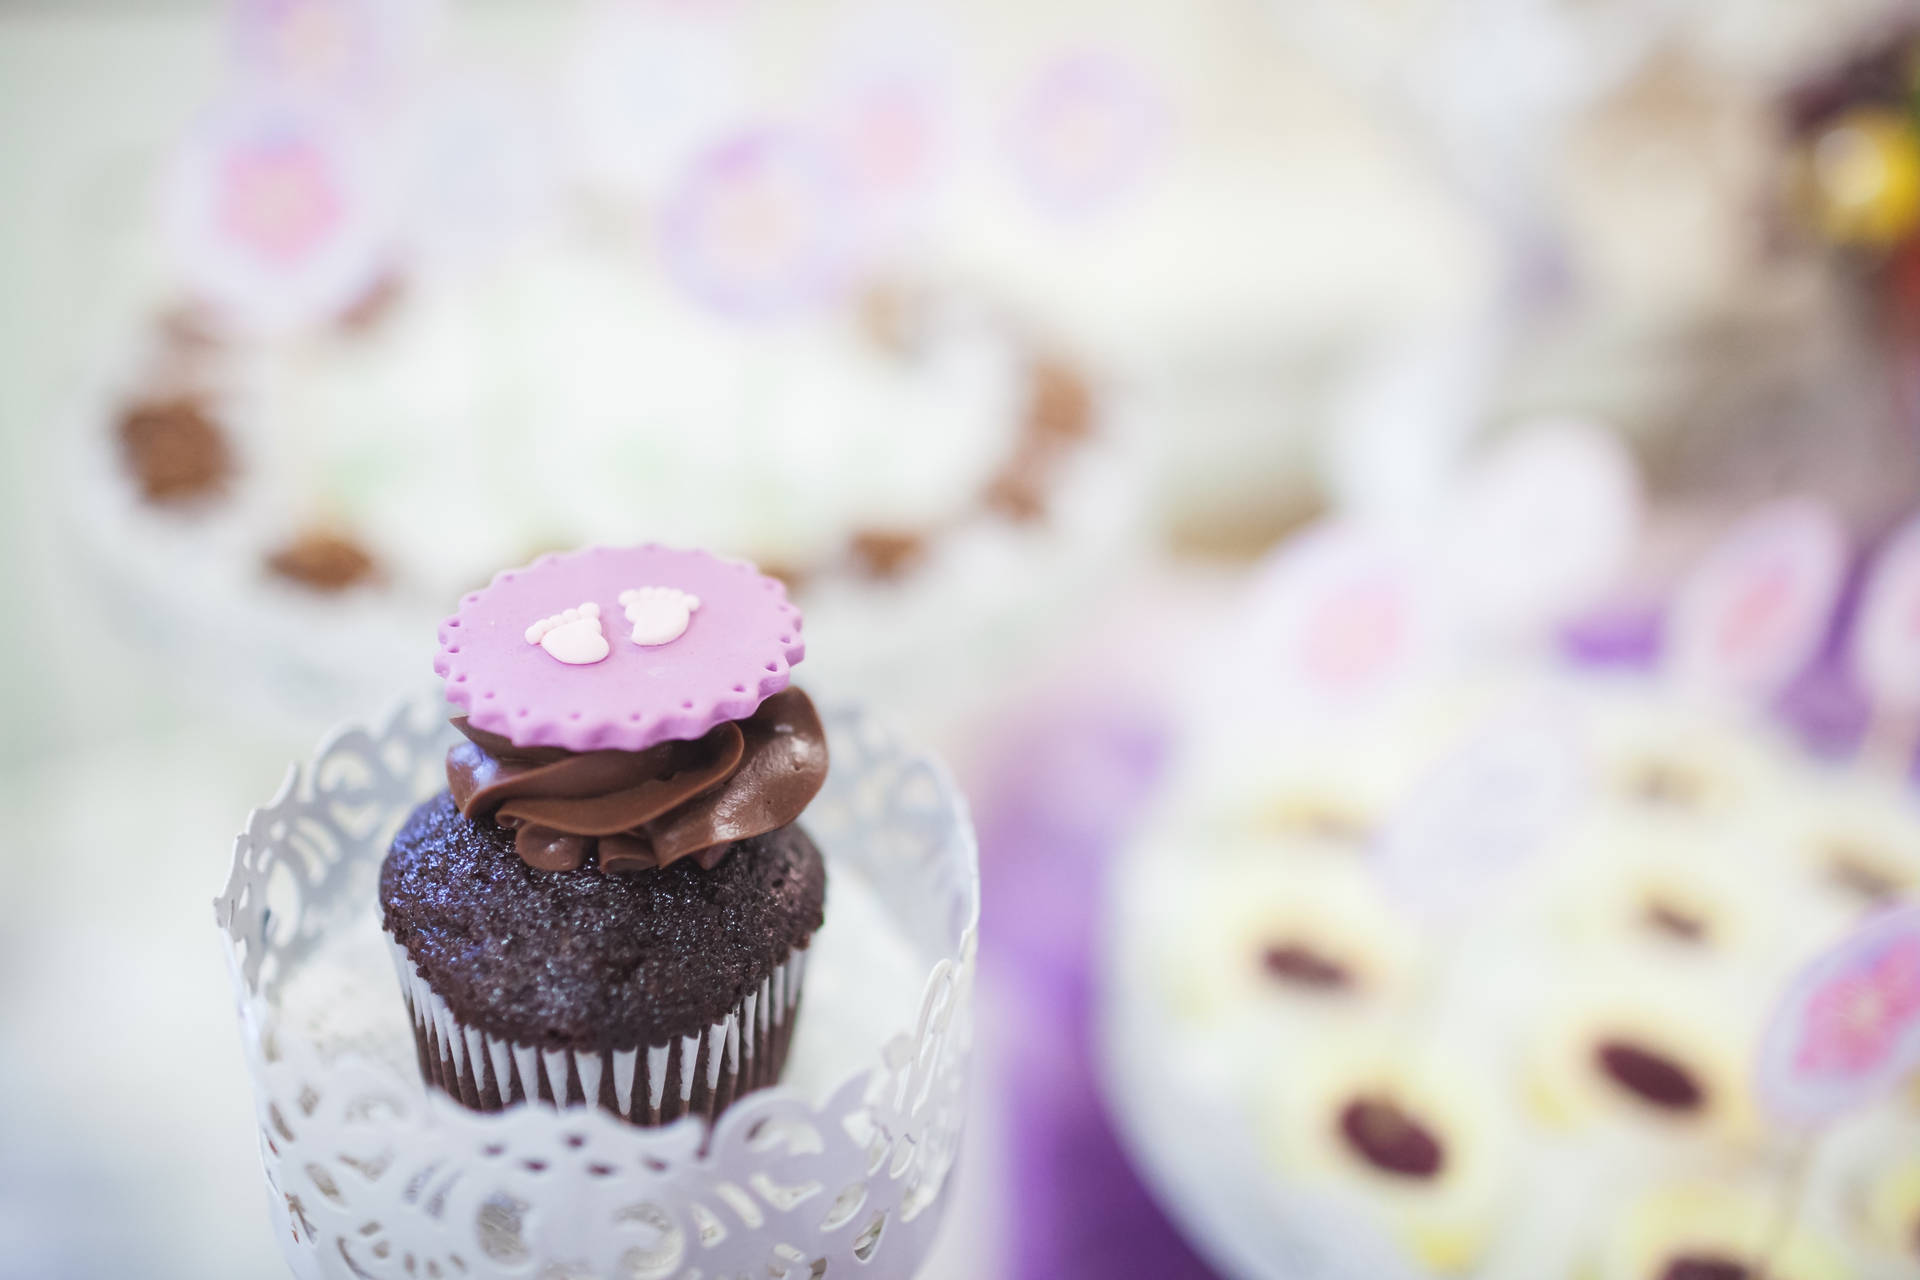 Cupcake 3861X2574 Wallpaper and Background Image